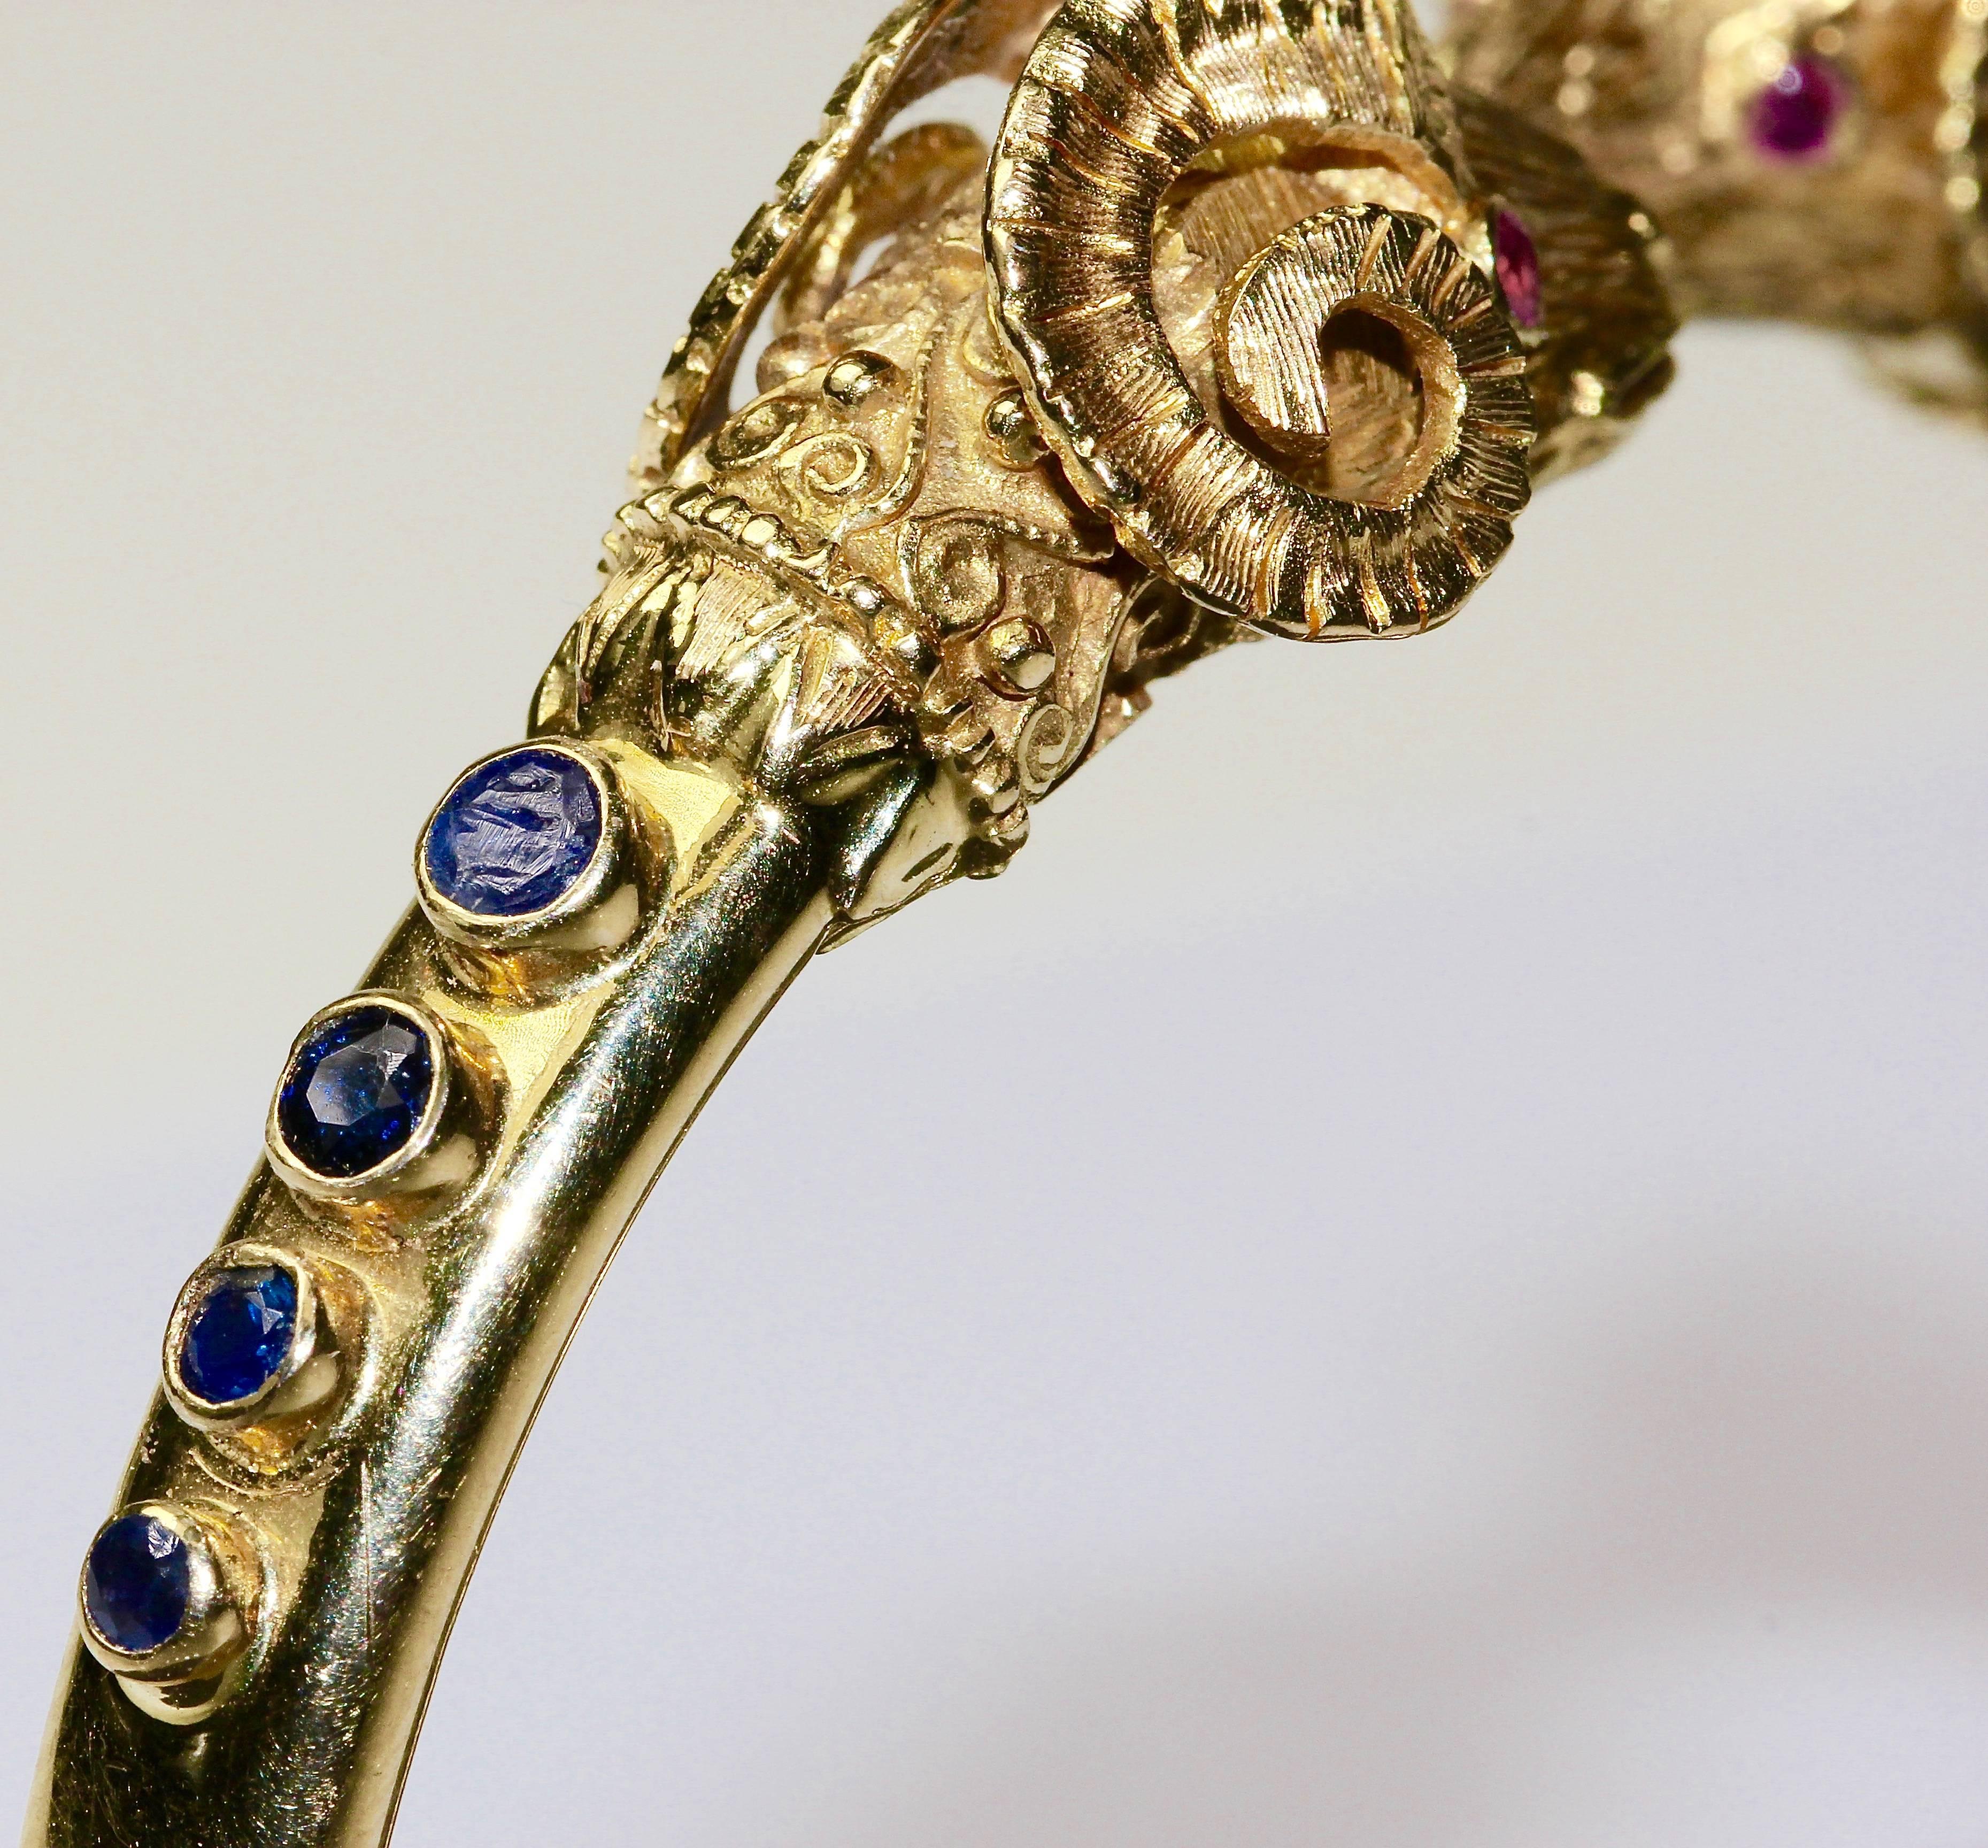 Exclusive bangle of the noble designer Ilias Lalaounis, made of 18k yellow gold. Set with eight sapphires and four rubies (as ram's eyes).
Hallmarked. Very good condition.